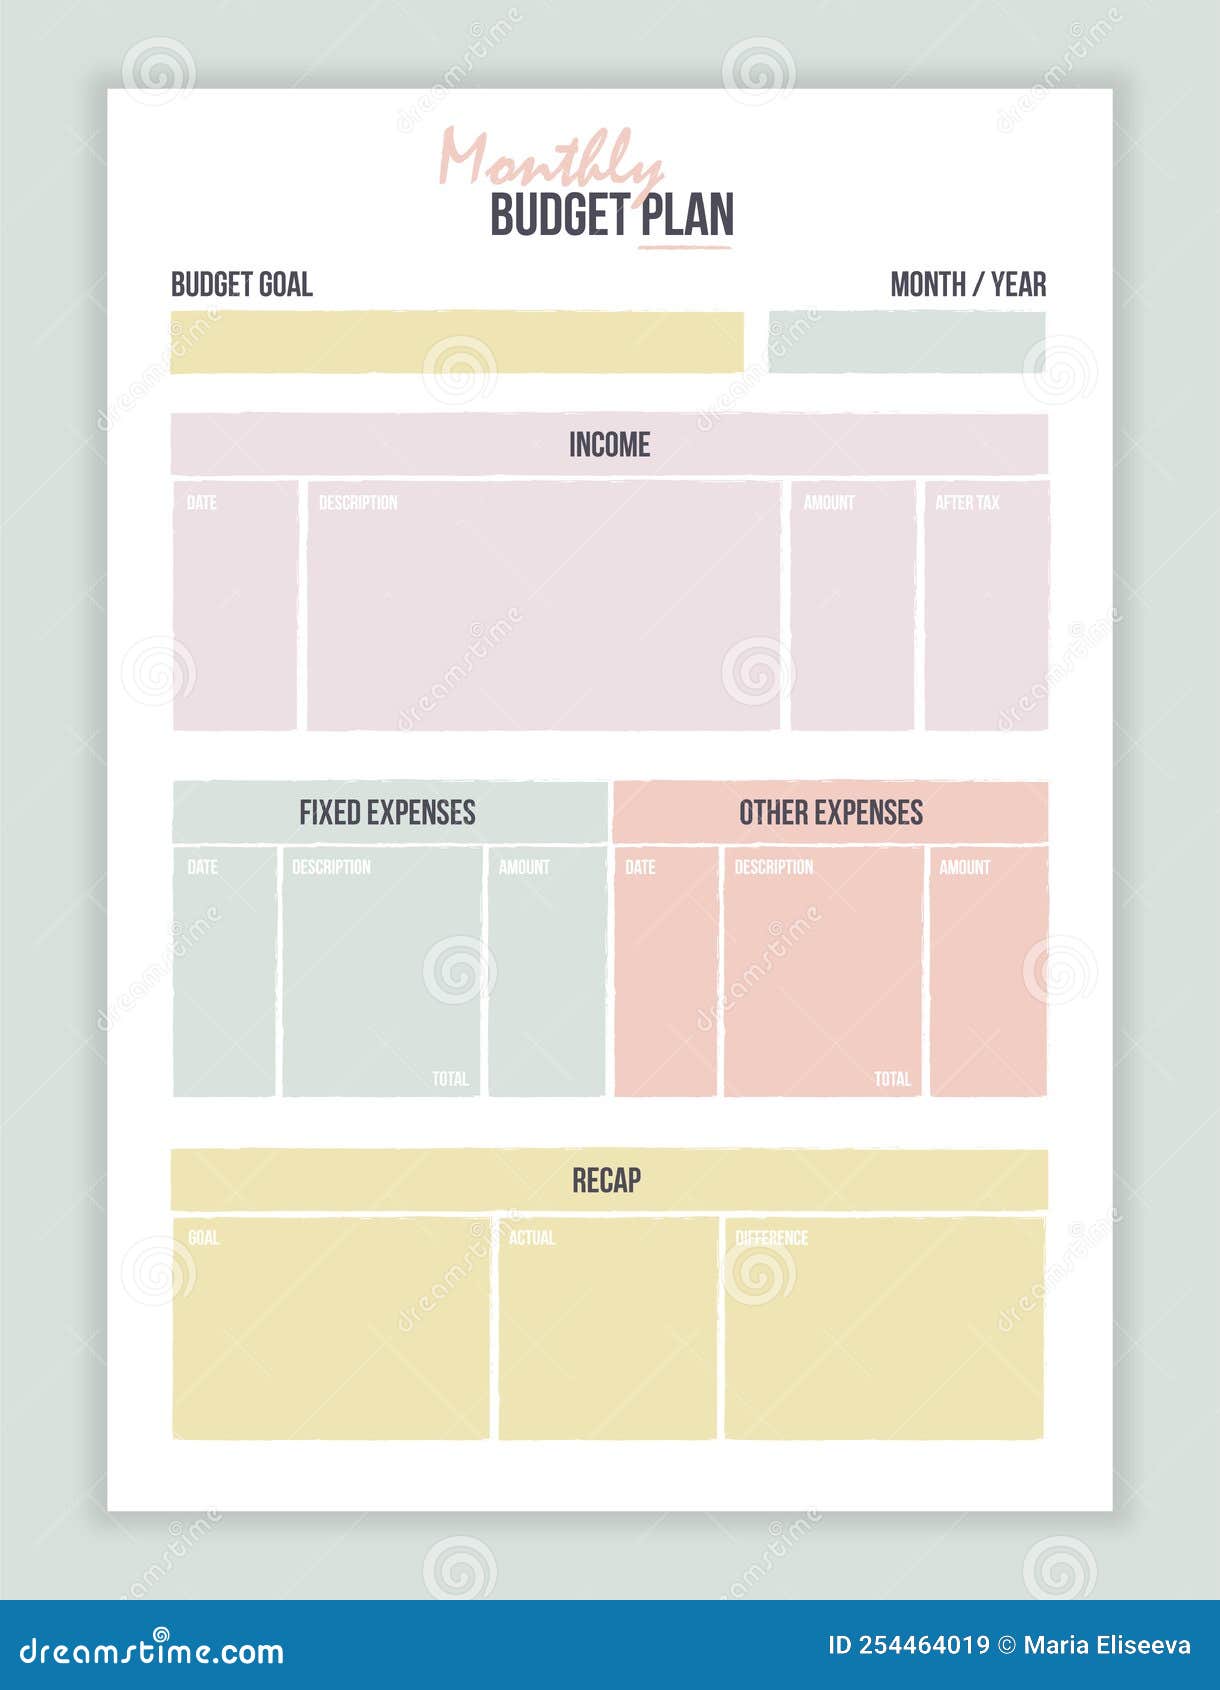 Monthly Budget Planner. Cute Finance Planner Template with